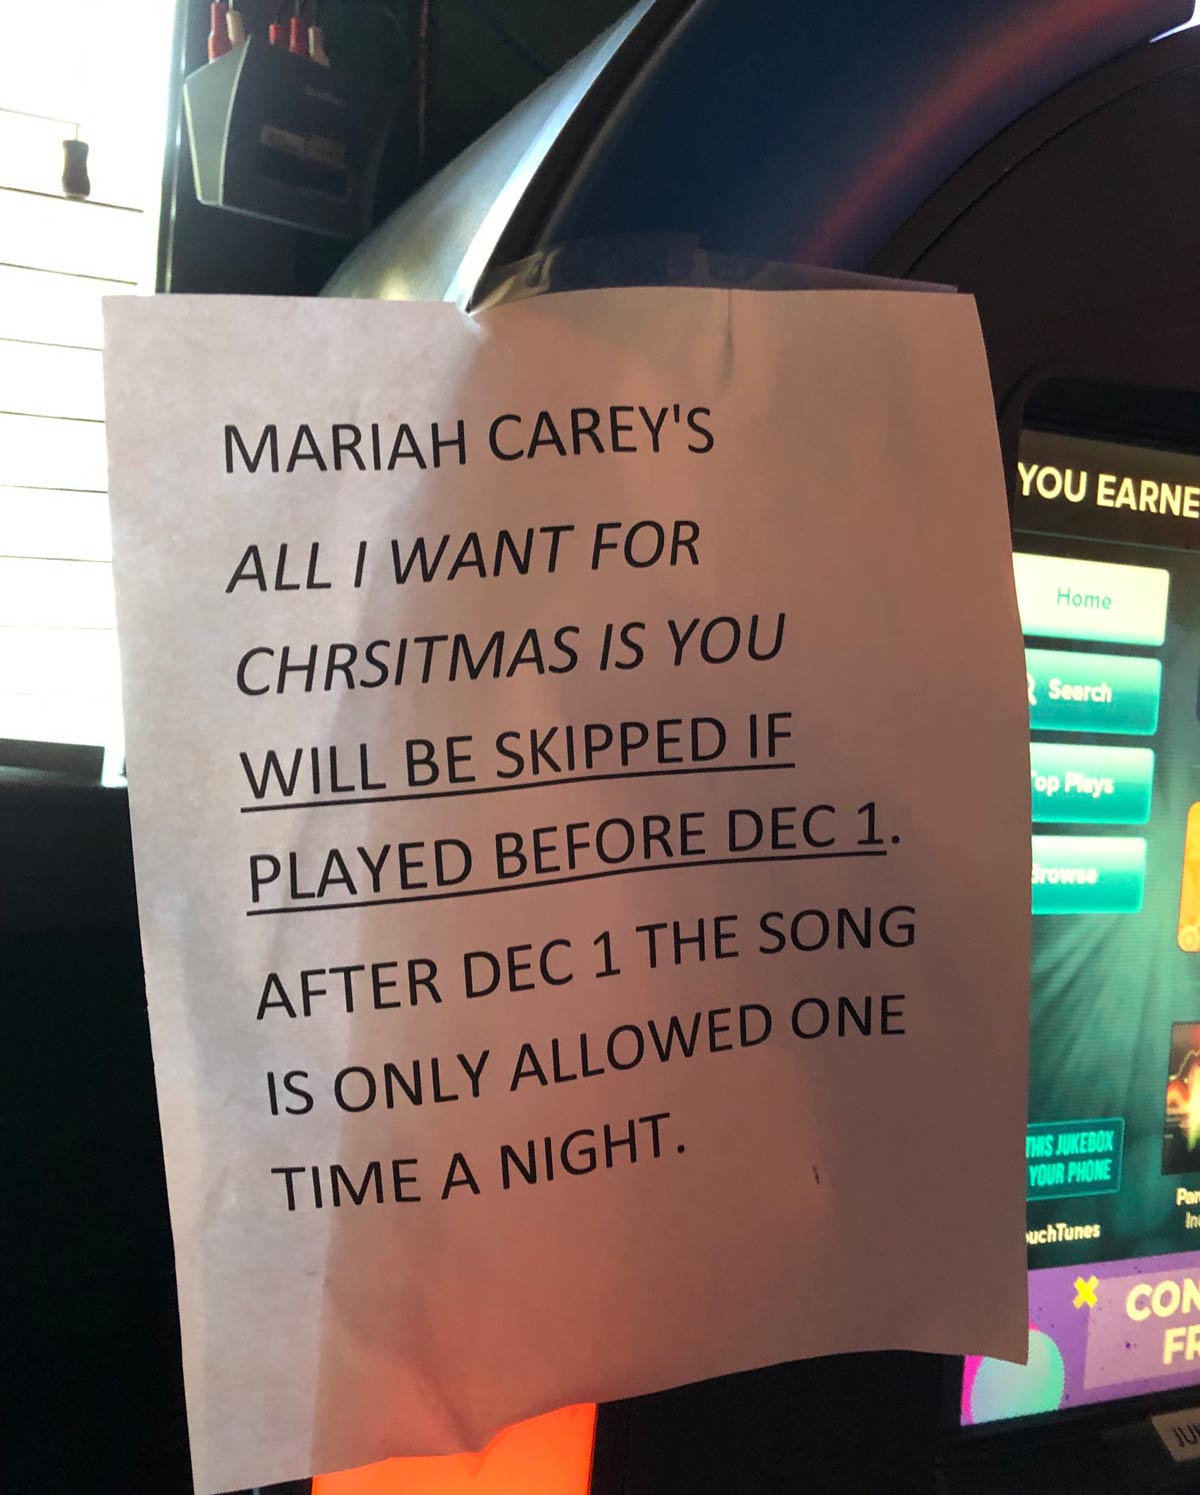 Seen on a Jukebox in Dallas